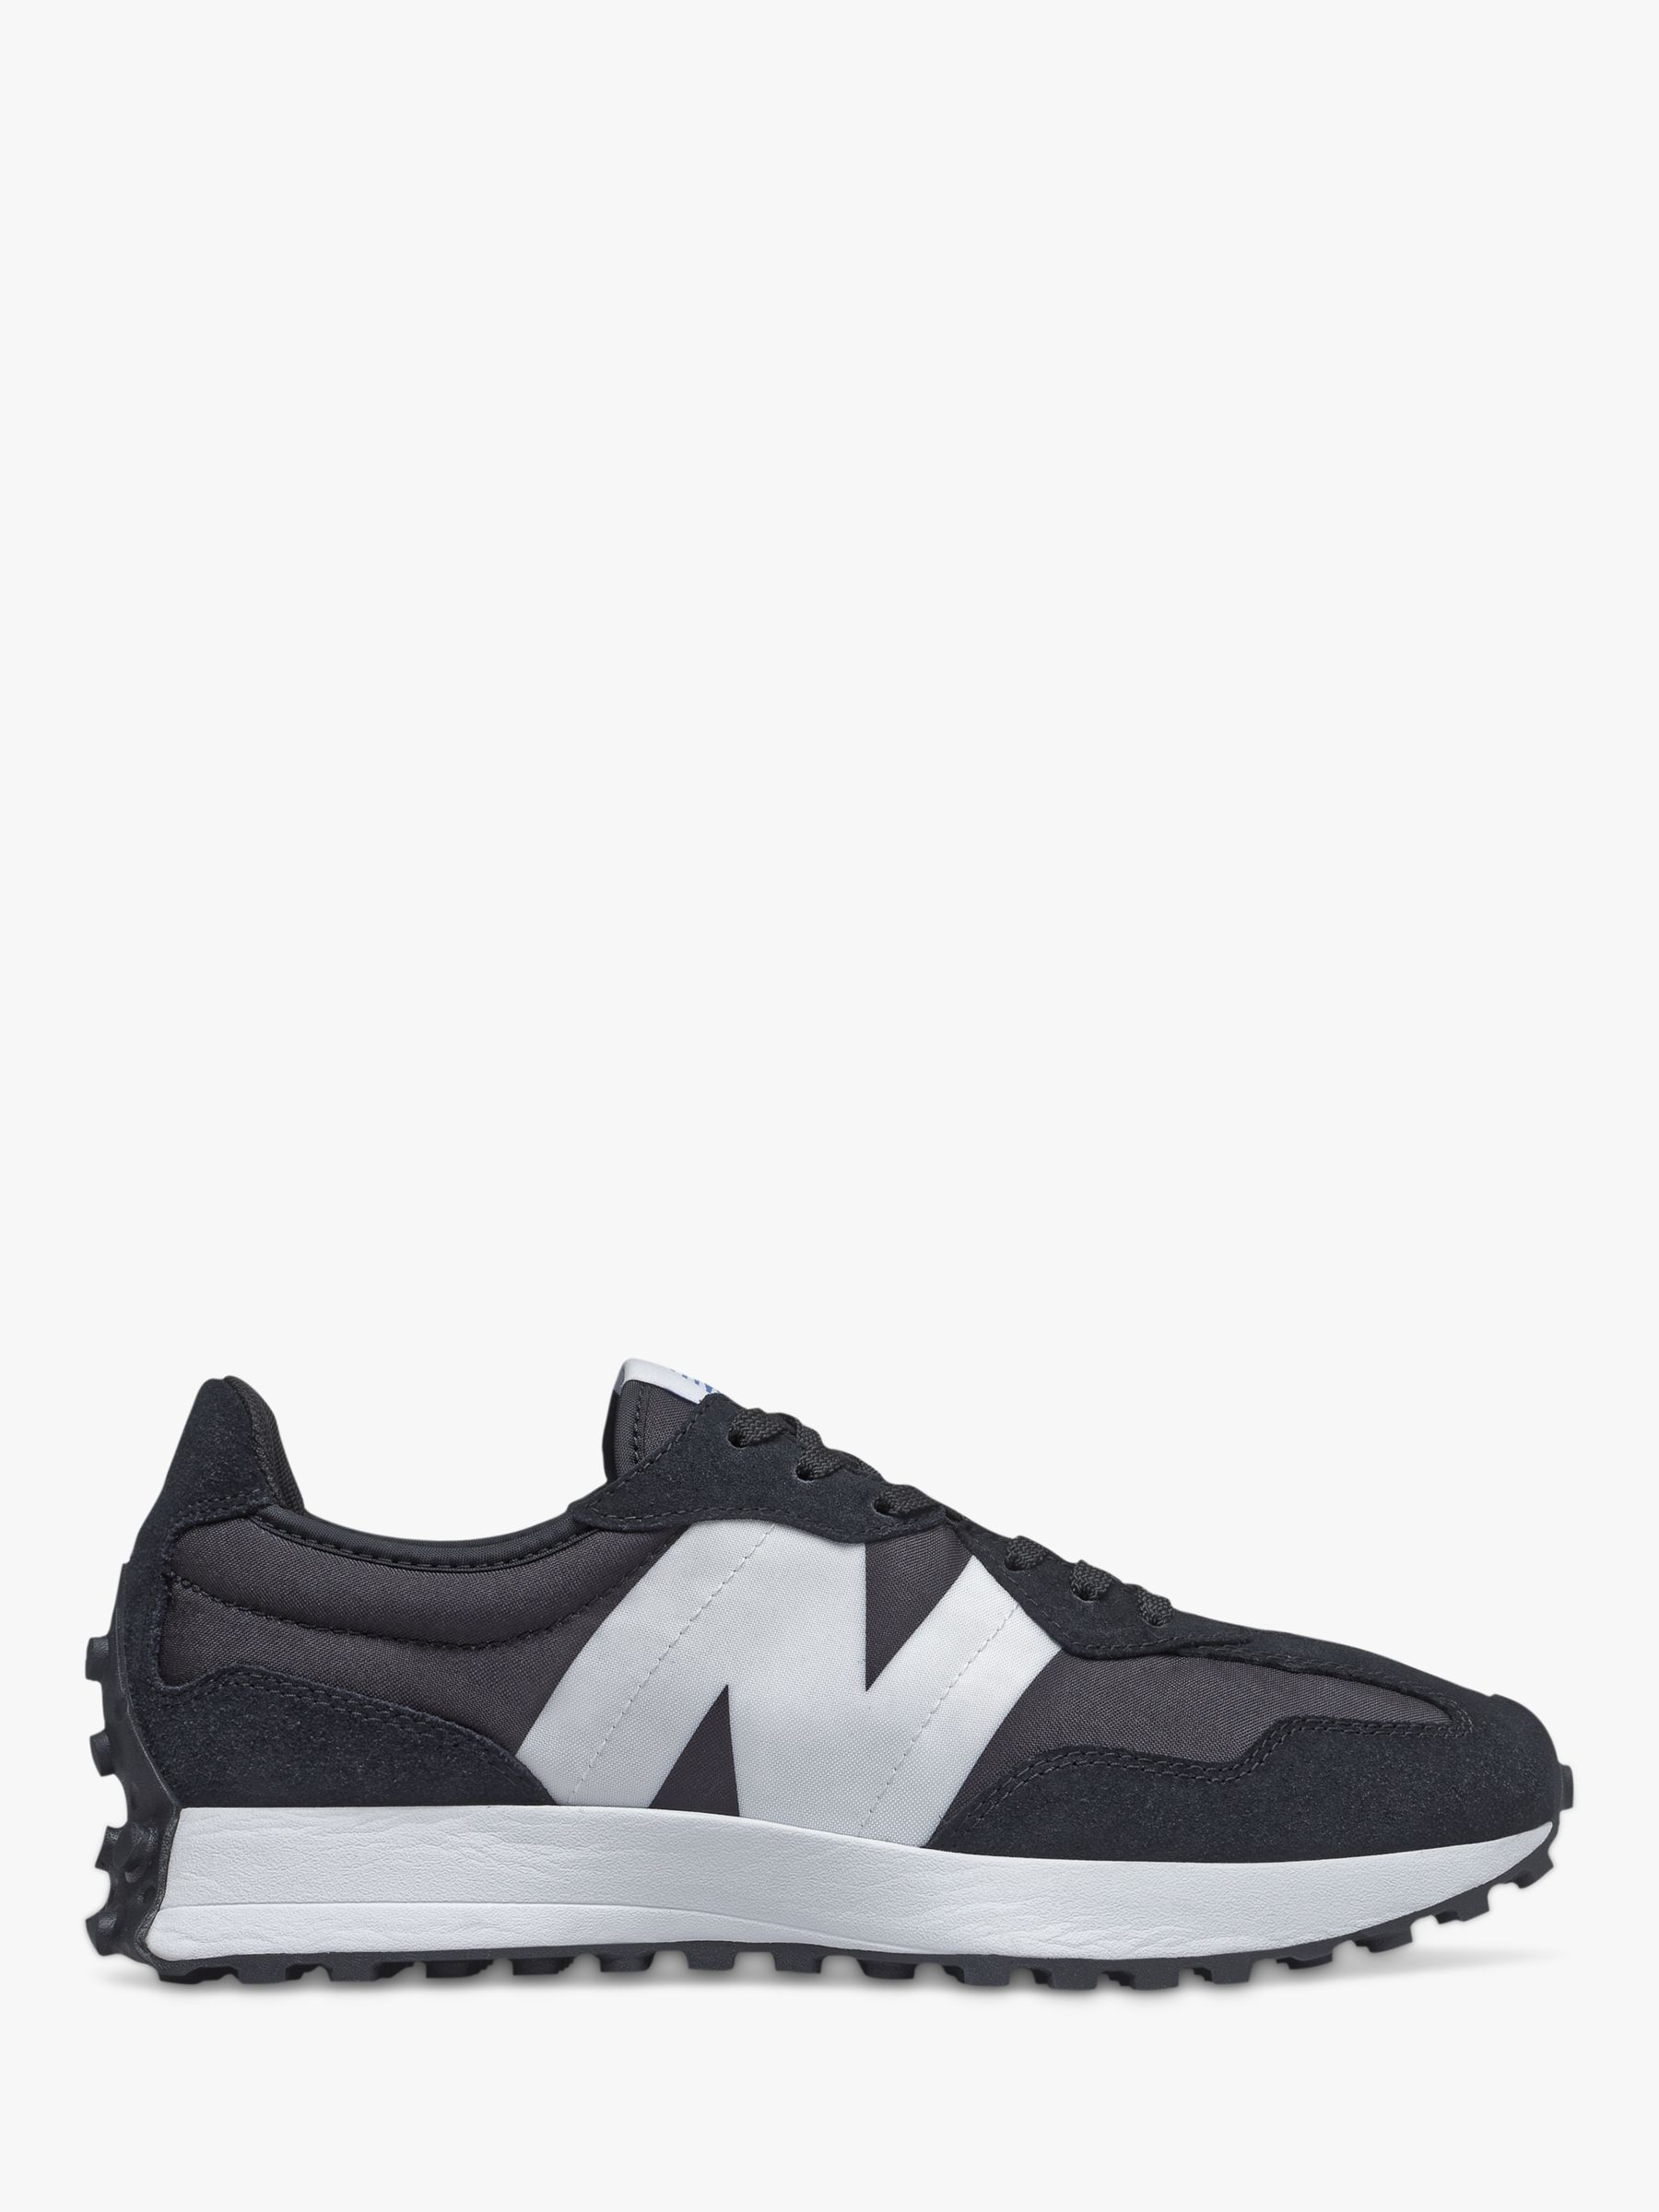 New Balance 327 Men's Trainers, at John Lewis & Partners